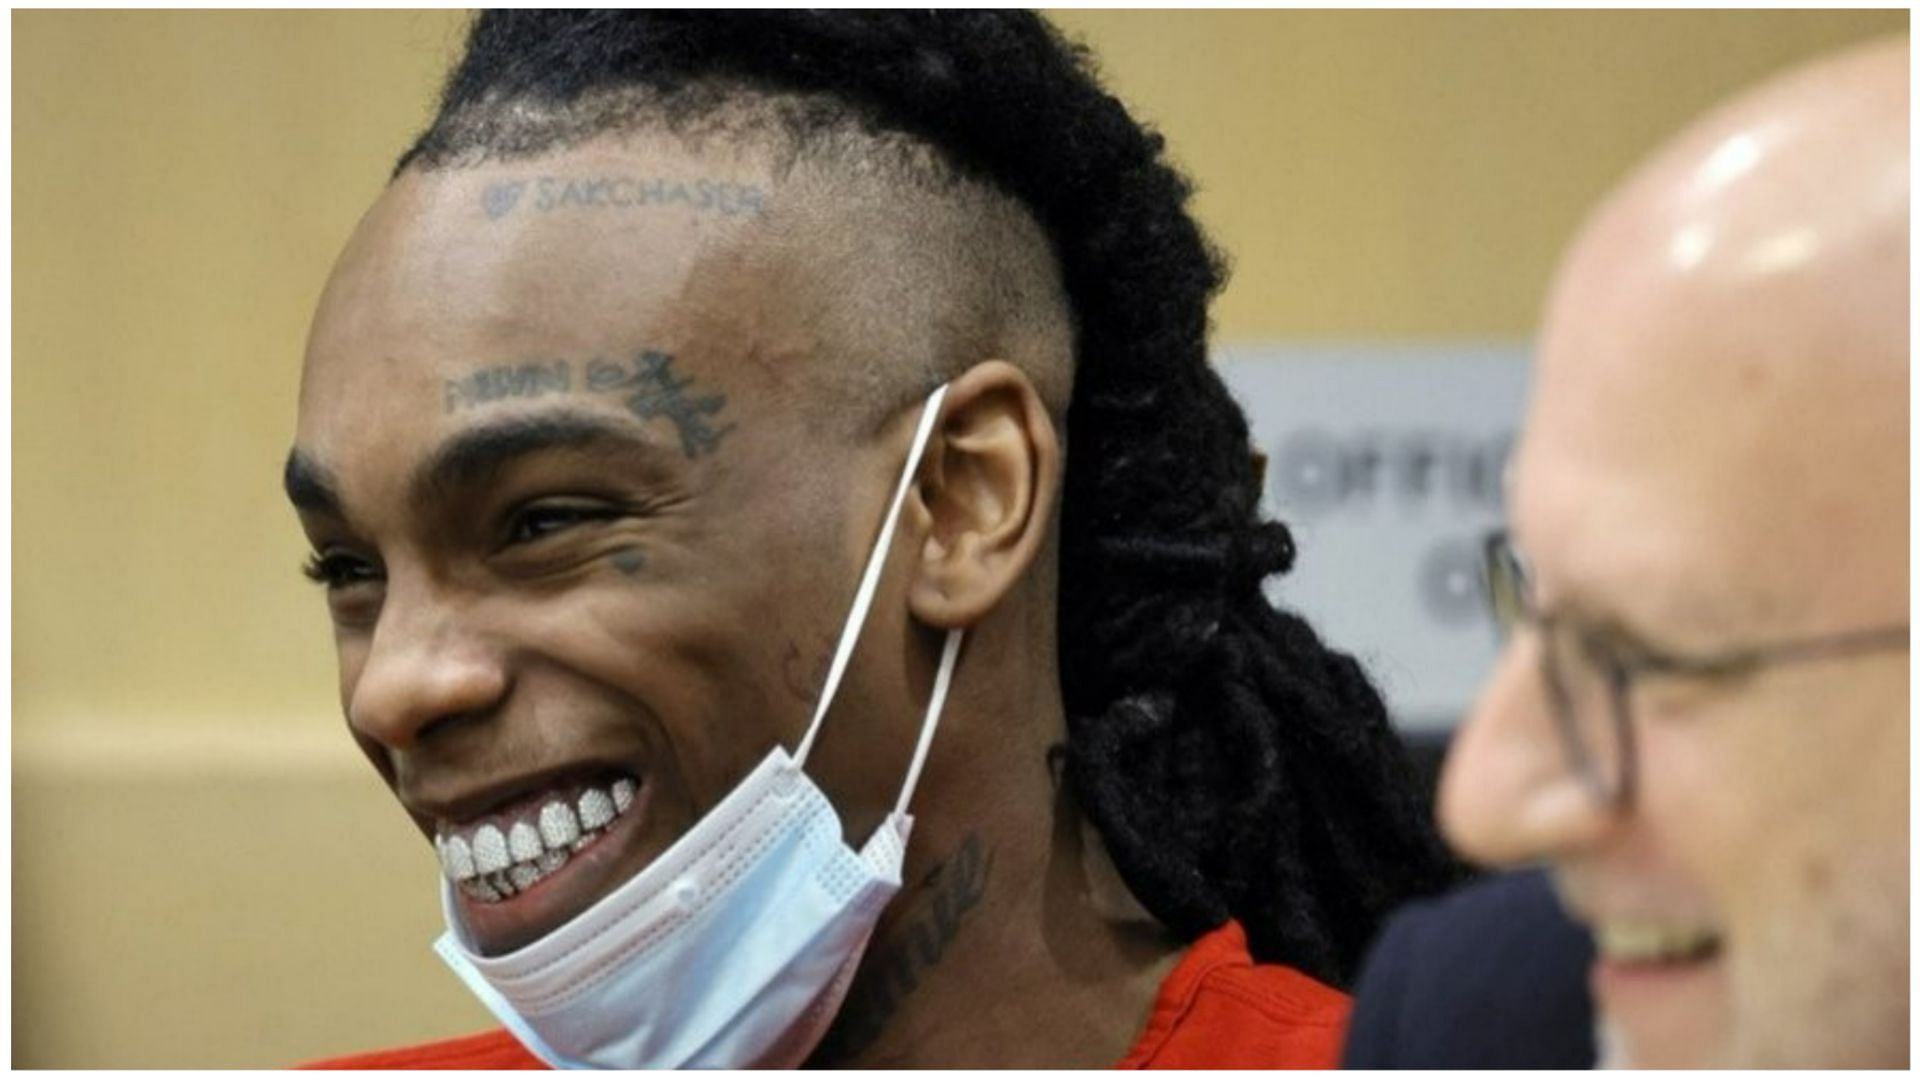 Death penalty is off the table for YNW Melly (Image via Say Cheese/Twitter)